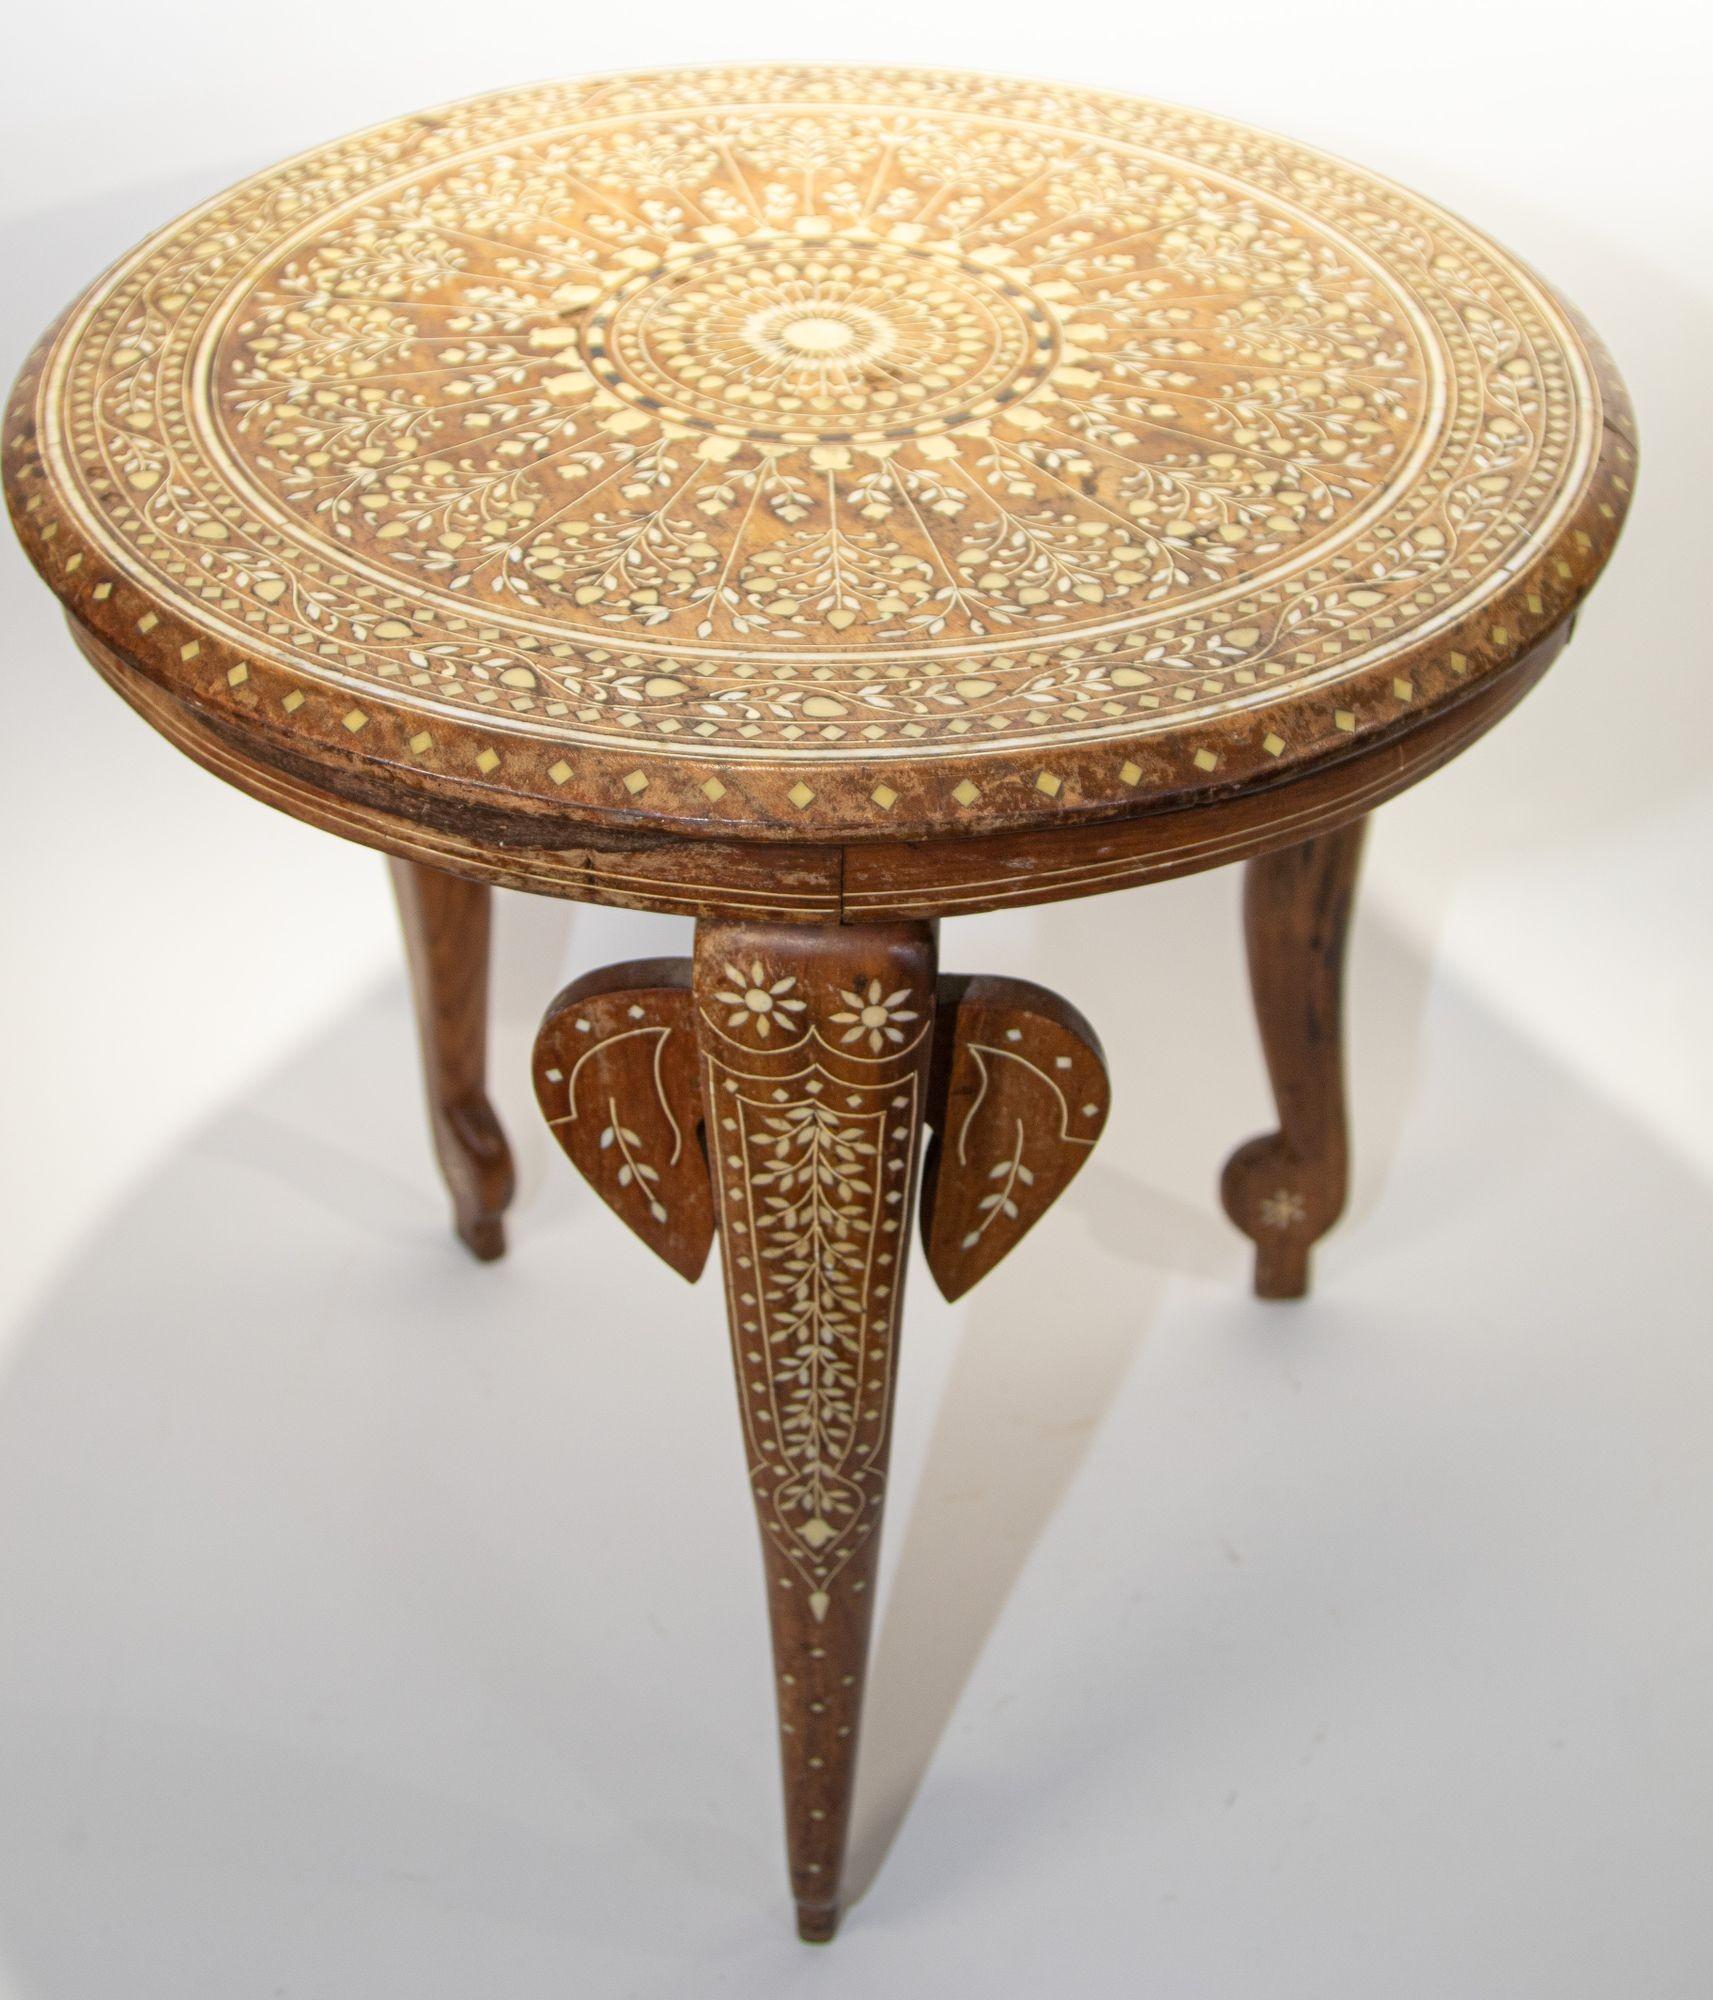 Hand-Crafted 19th c, Anglo Indian Mughal Teak Inlaid Round Side Table